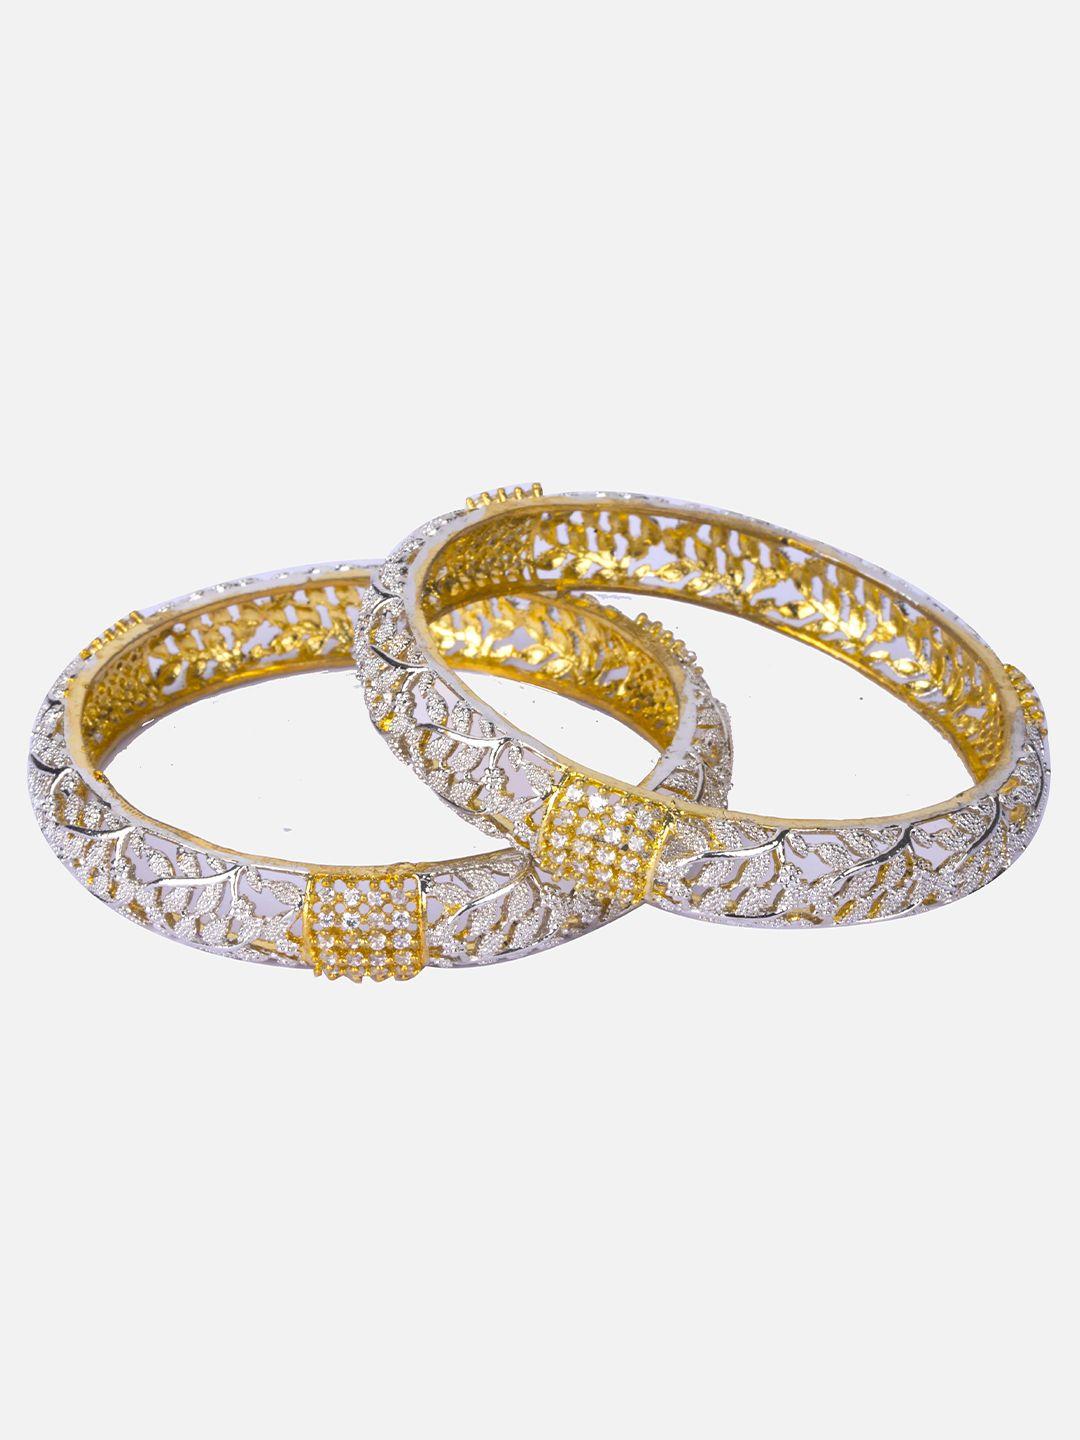 nathany jewels pack of 2 gold-plated silver-toned white cz stone-studded bangles